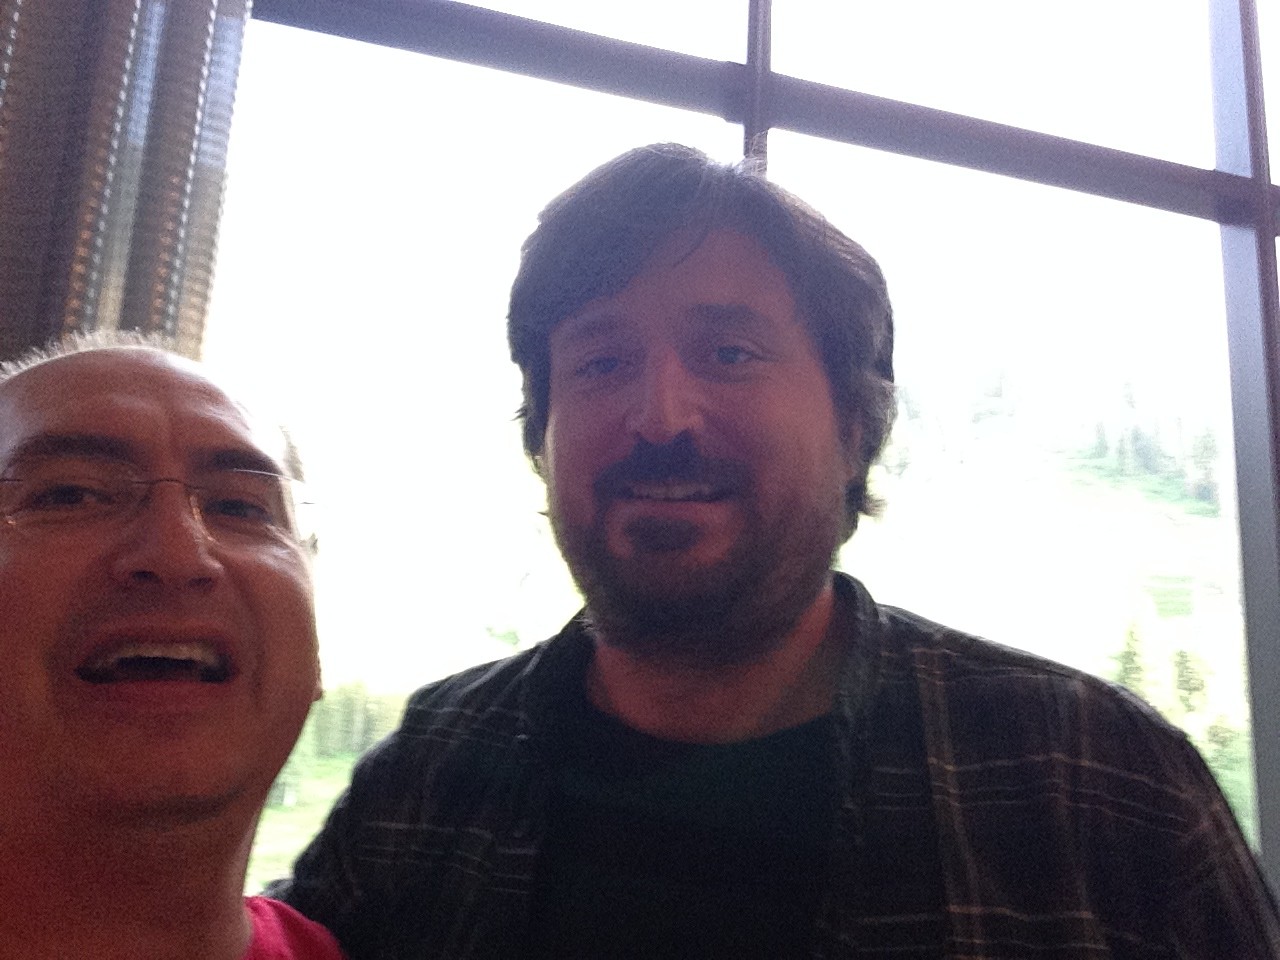 DiGRA 2014 selfie with mystery guest revealed as Jeff Watson